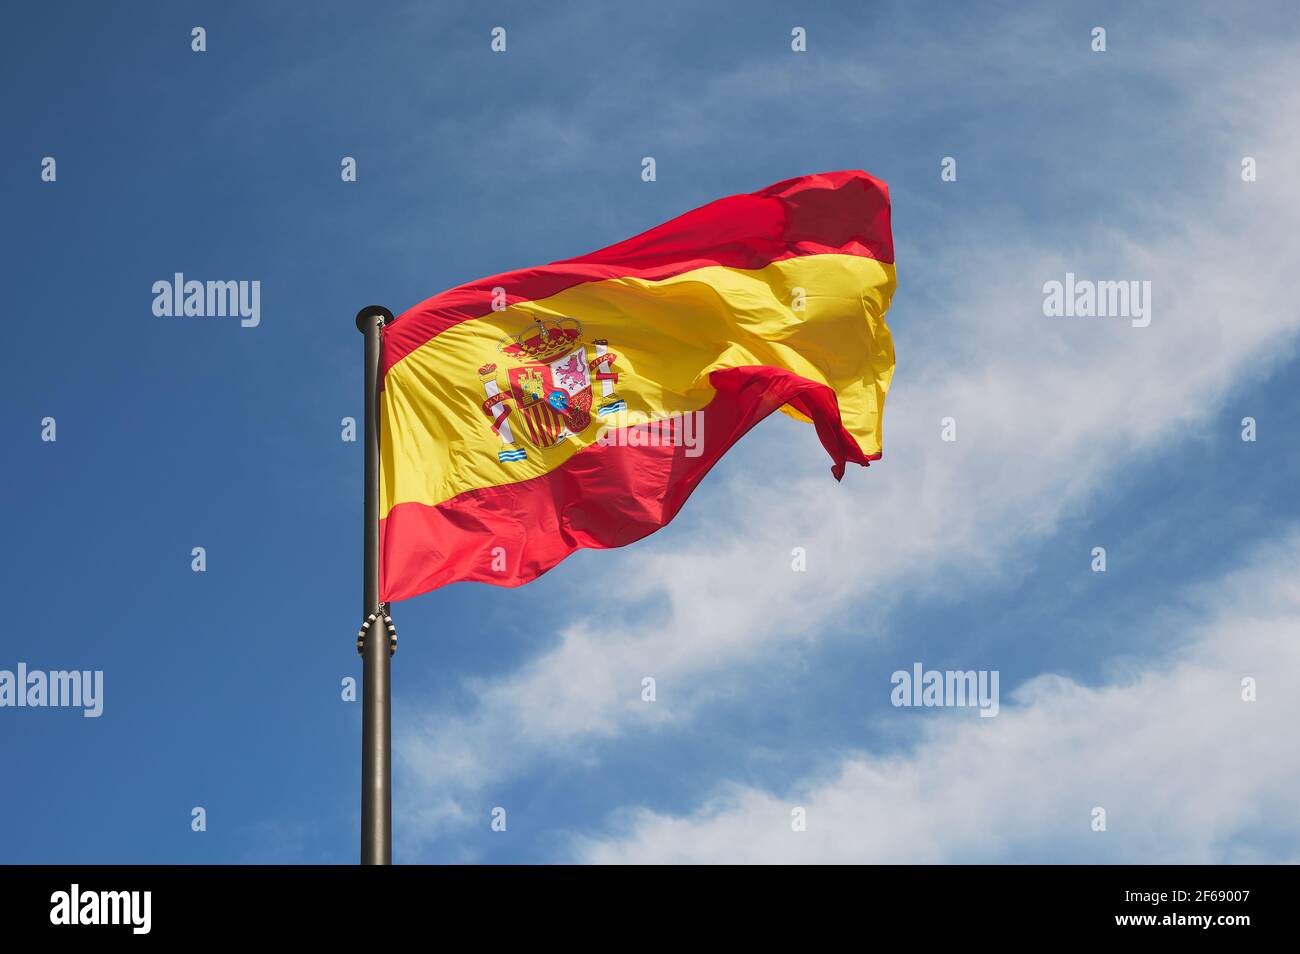 detail of the Spanish flag flying on a large black mast against a blue sky. Stock Photo